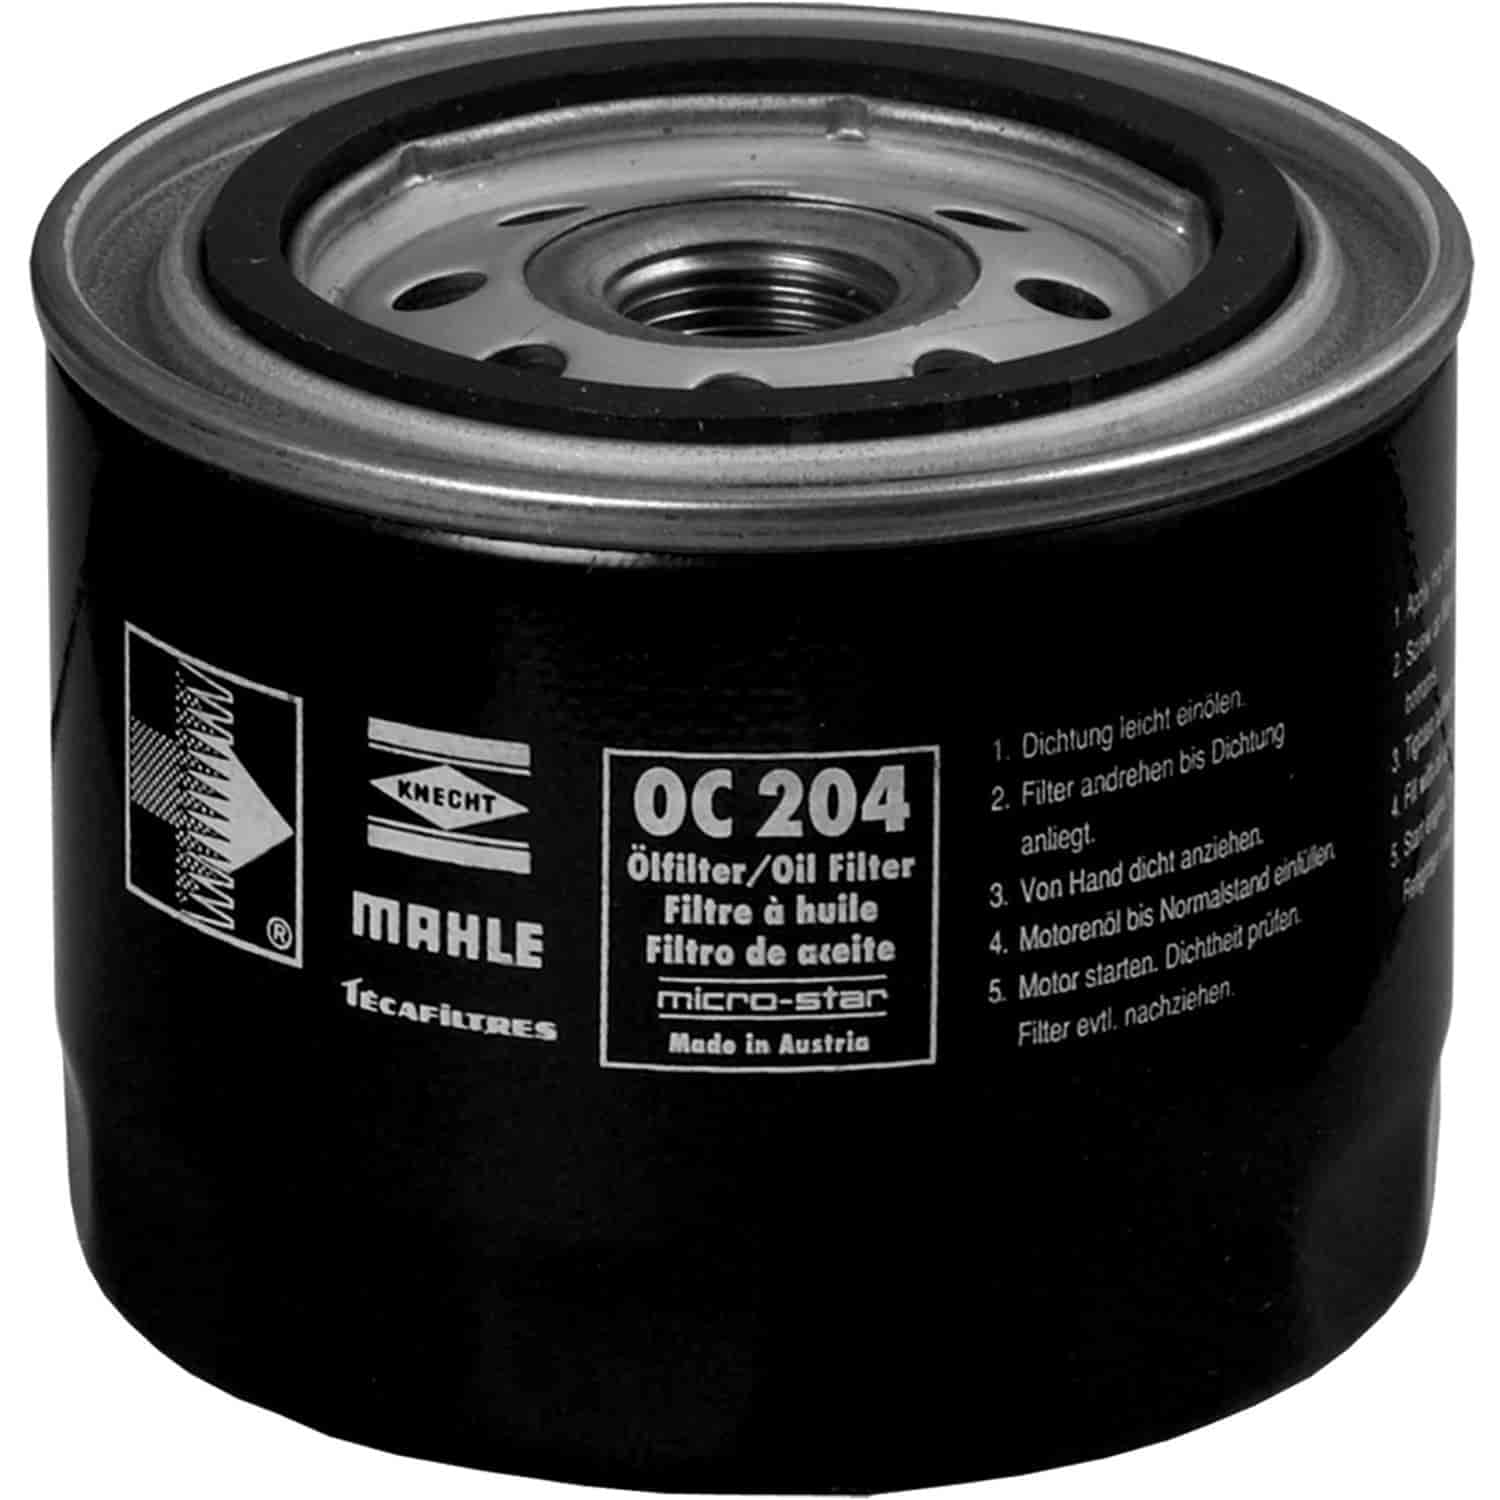 Mahle Oil Filter Volvo 240 360. 740 760